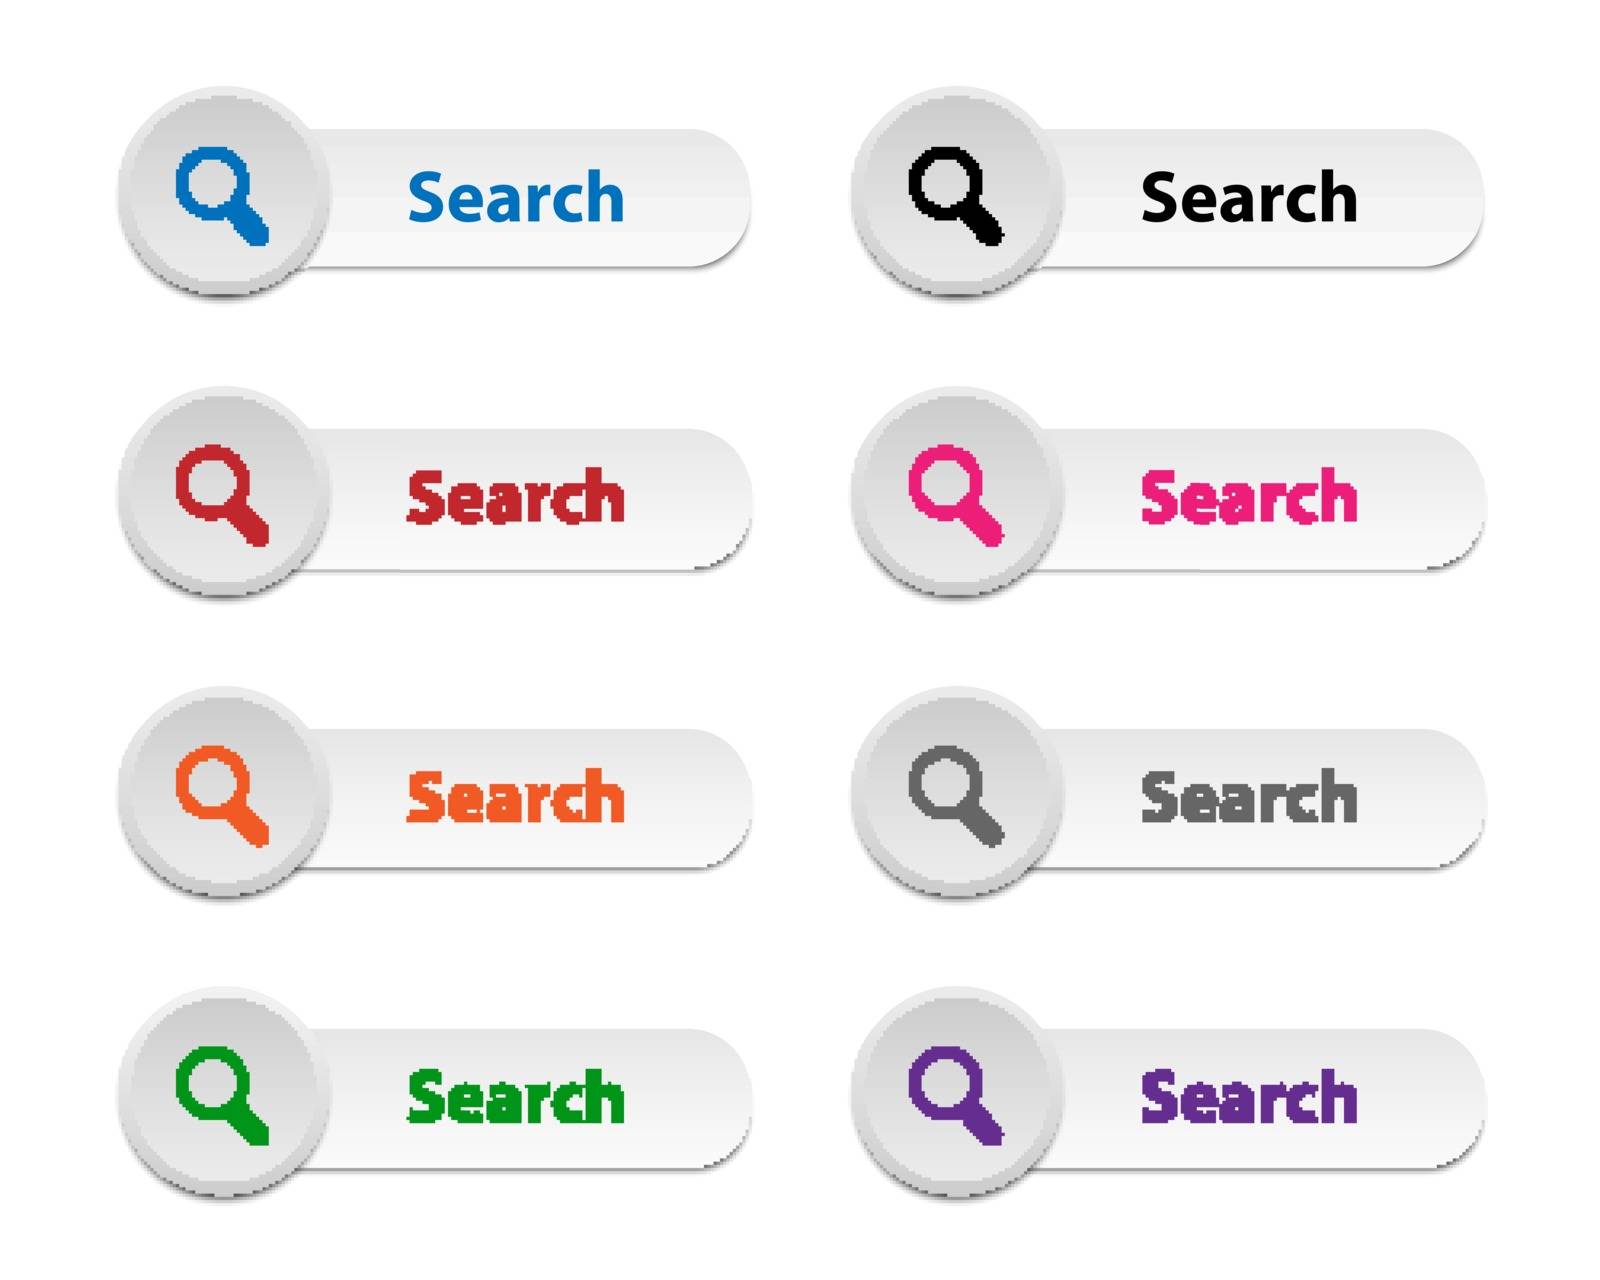 Collection of search buttons in various colors